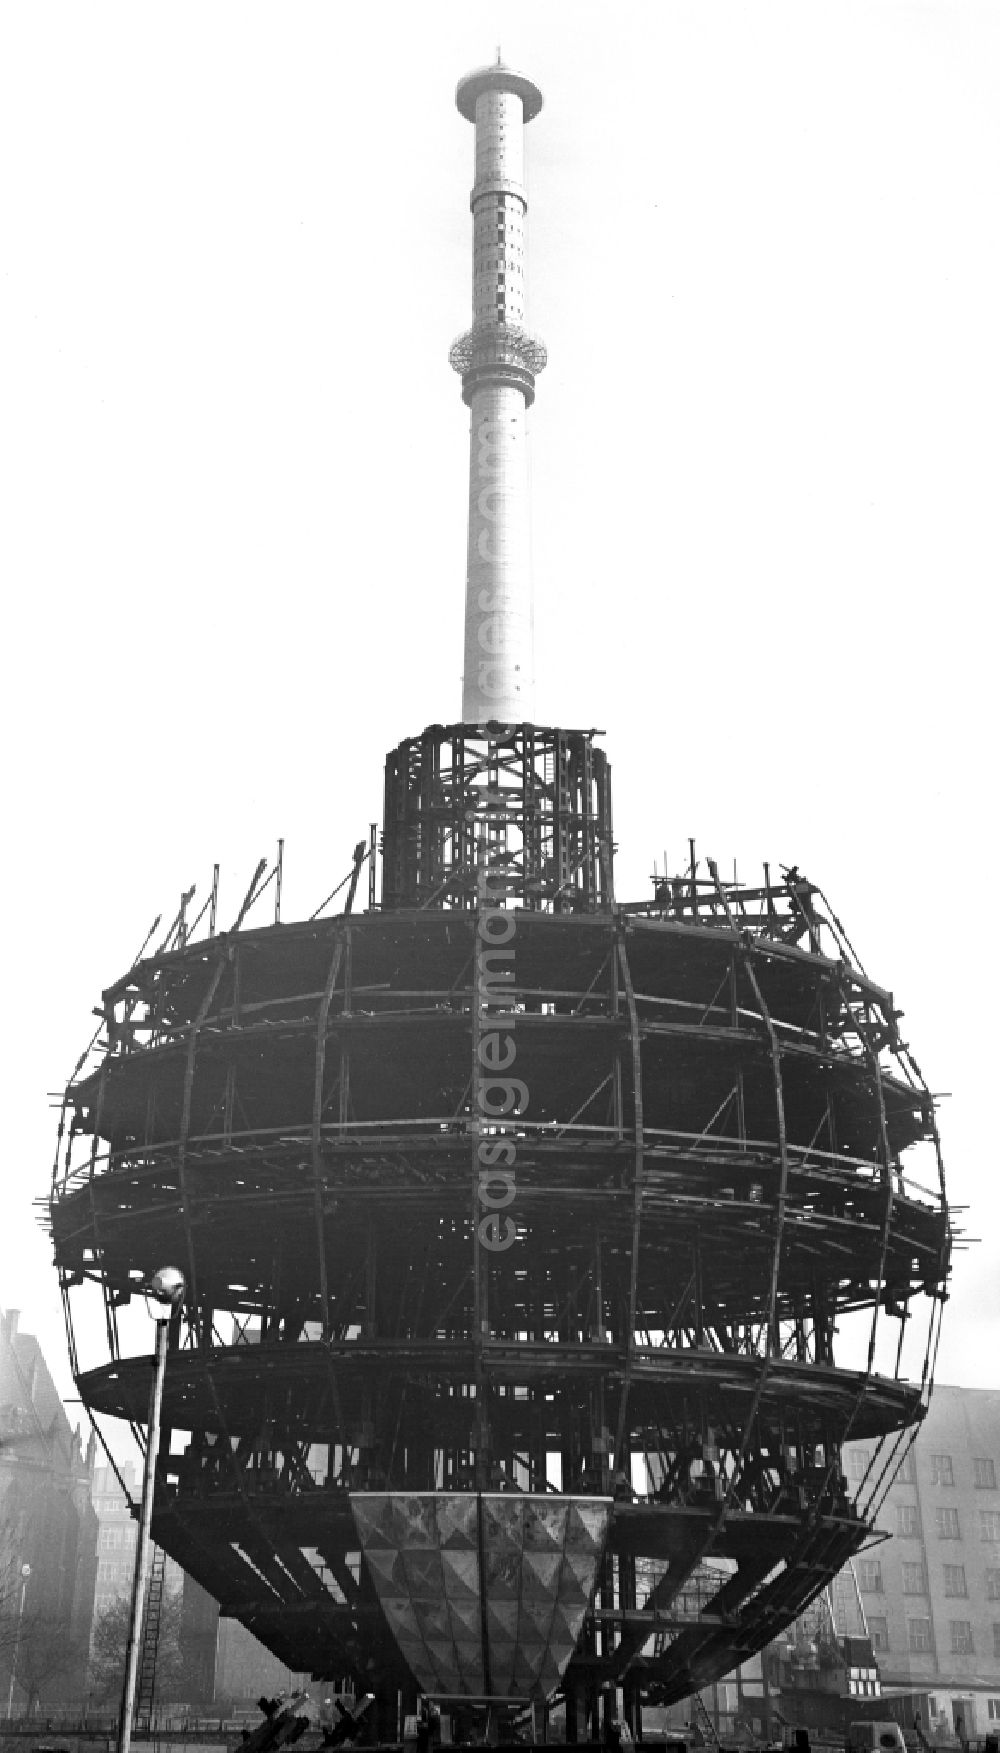 GDR image archive: Berlin - Construction on the sliding core of the Berlin TV Tower in the district Mitte in Berlin, the former capital of the GDR, German Democratic Republic